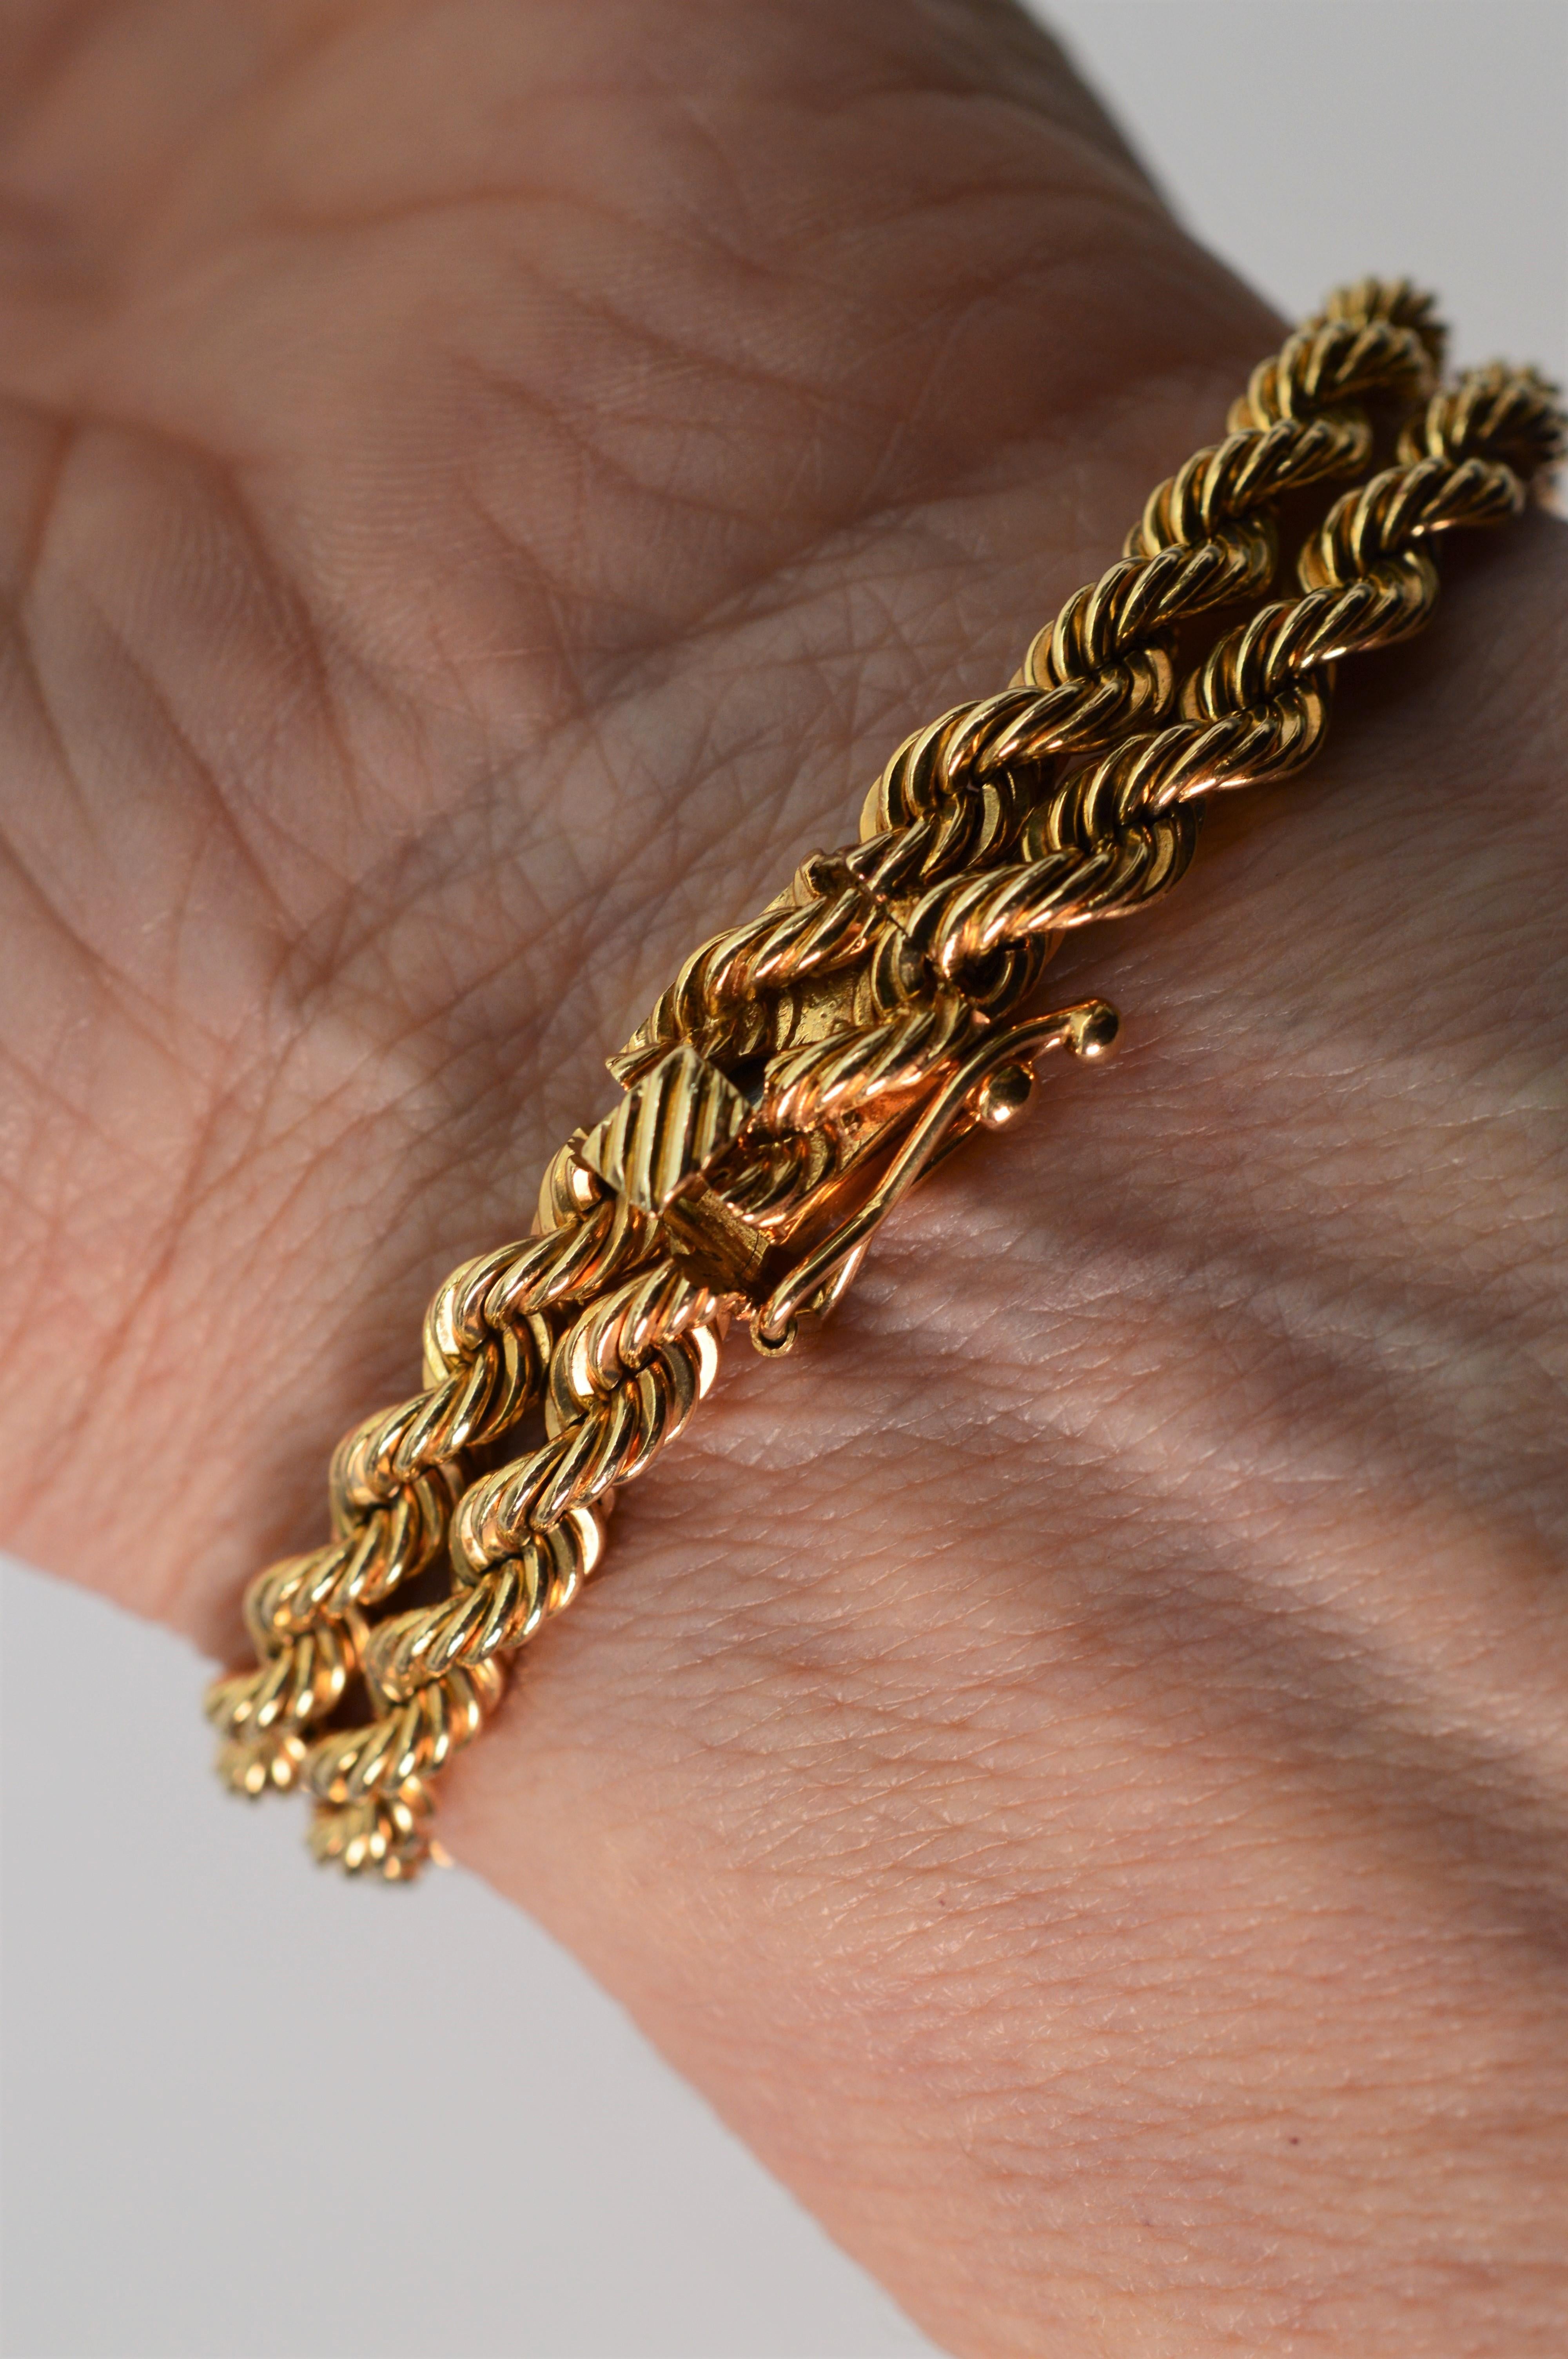 Double Rope Chain 14 Karat Yellow Gold Bracelet with Pineapple Charm Tassels 5